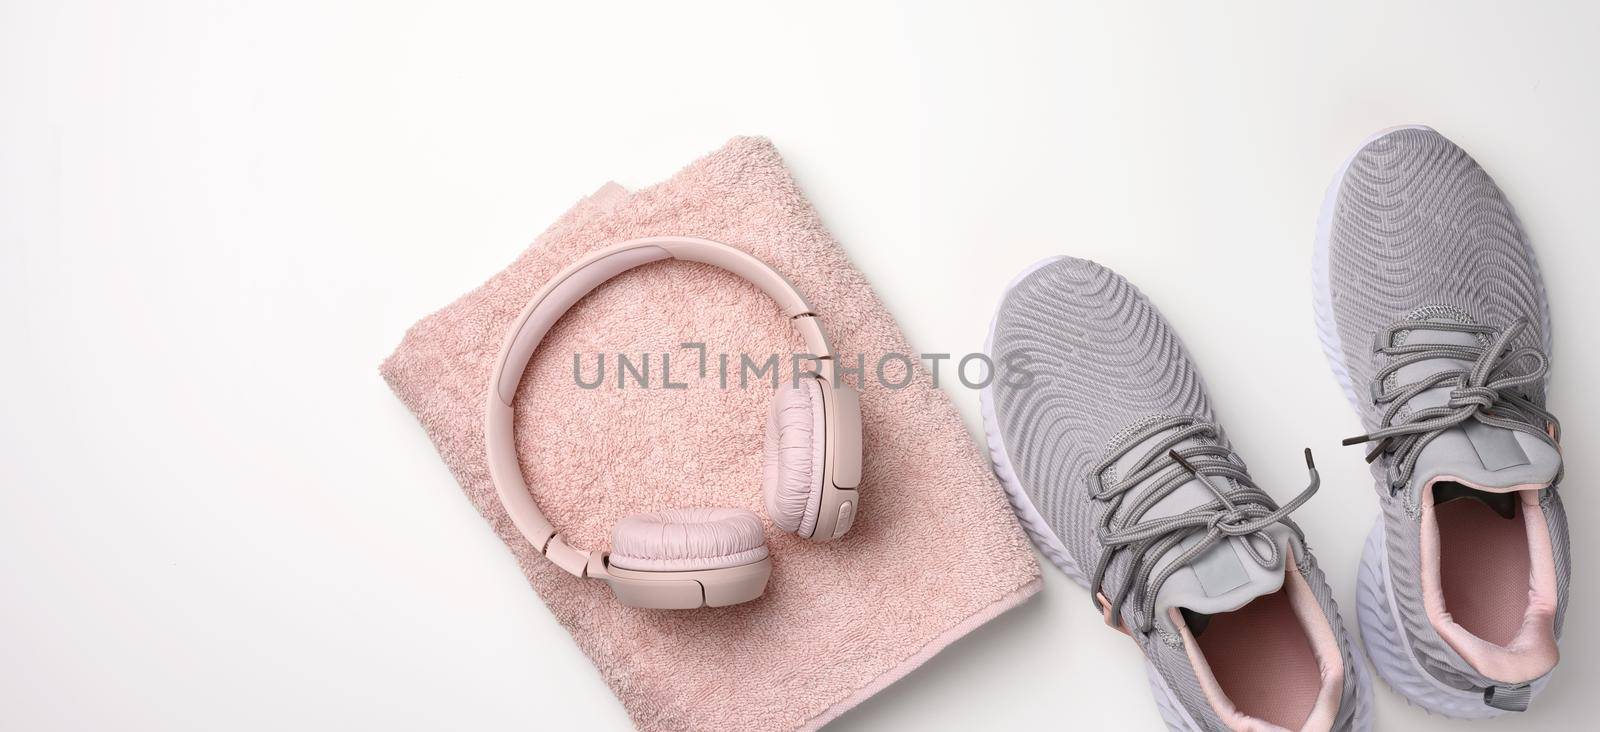 pair of gray textile sneakers, wireless headphones and a textile pink towel on a white background. Set for sports, running